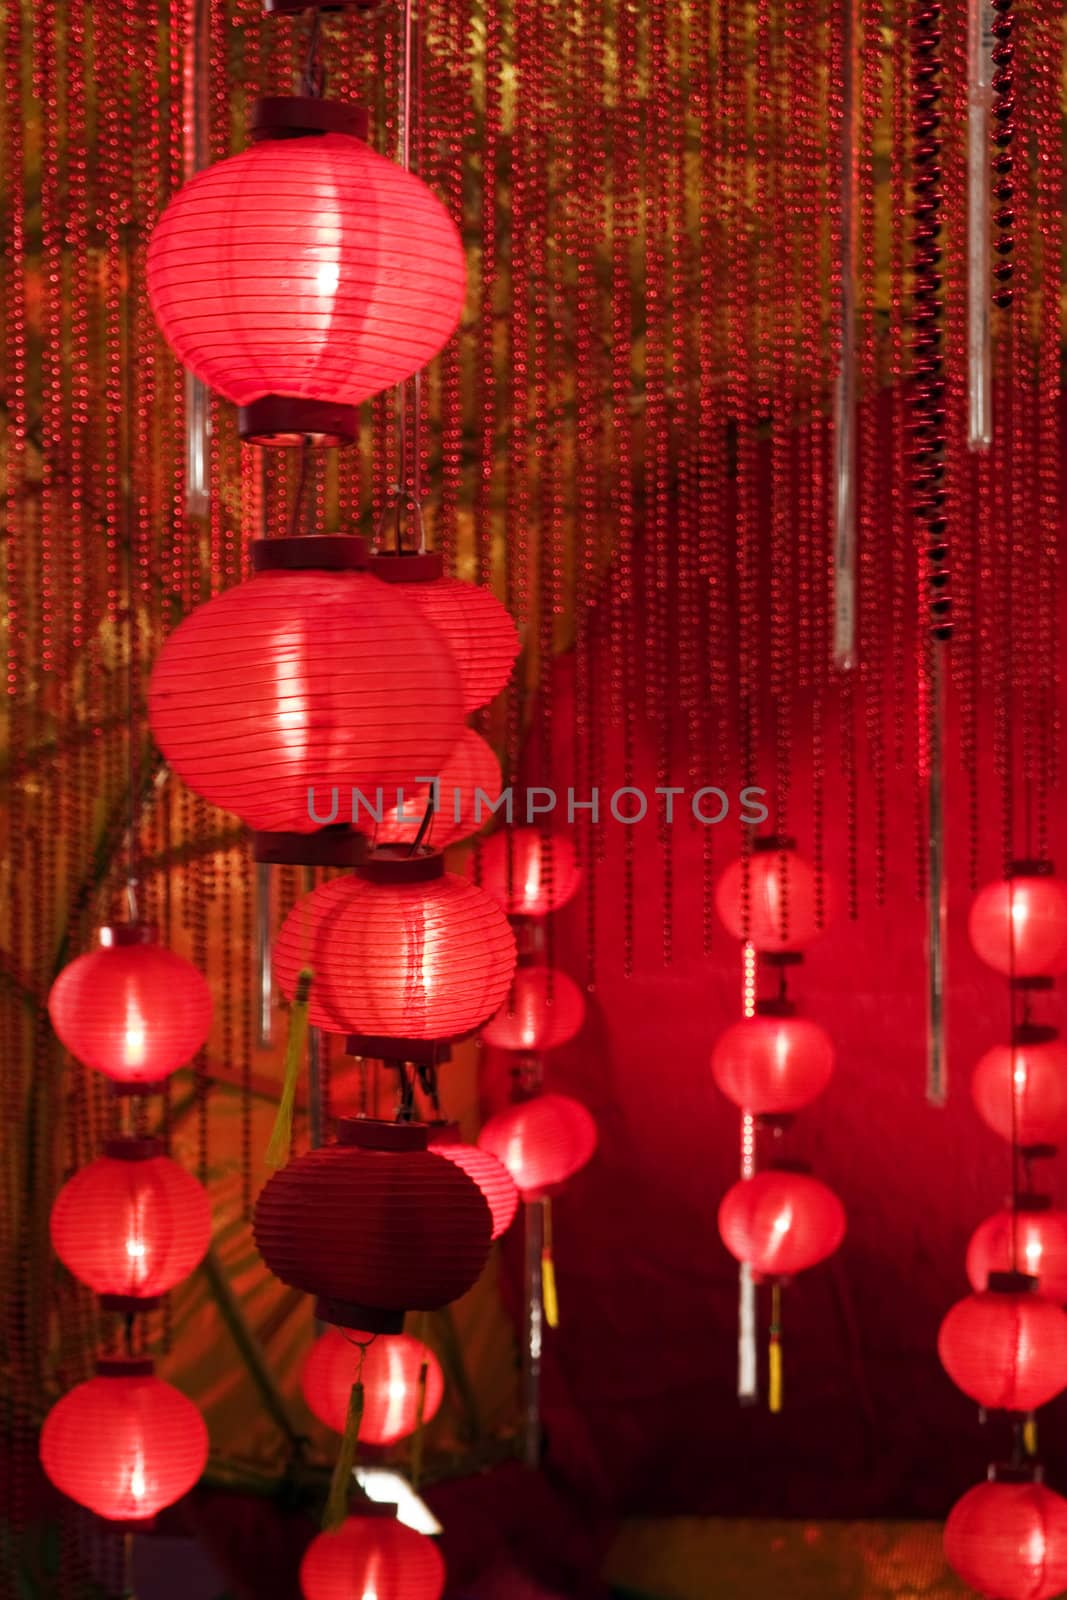 Big red lanterns with chinese letters printed. It brings good luck and peace to prayer. It was at night in a chinese temple during Chinese New Year.